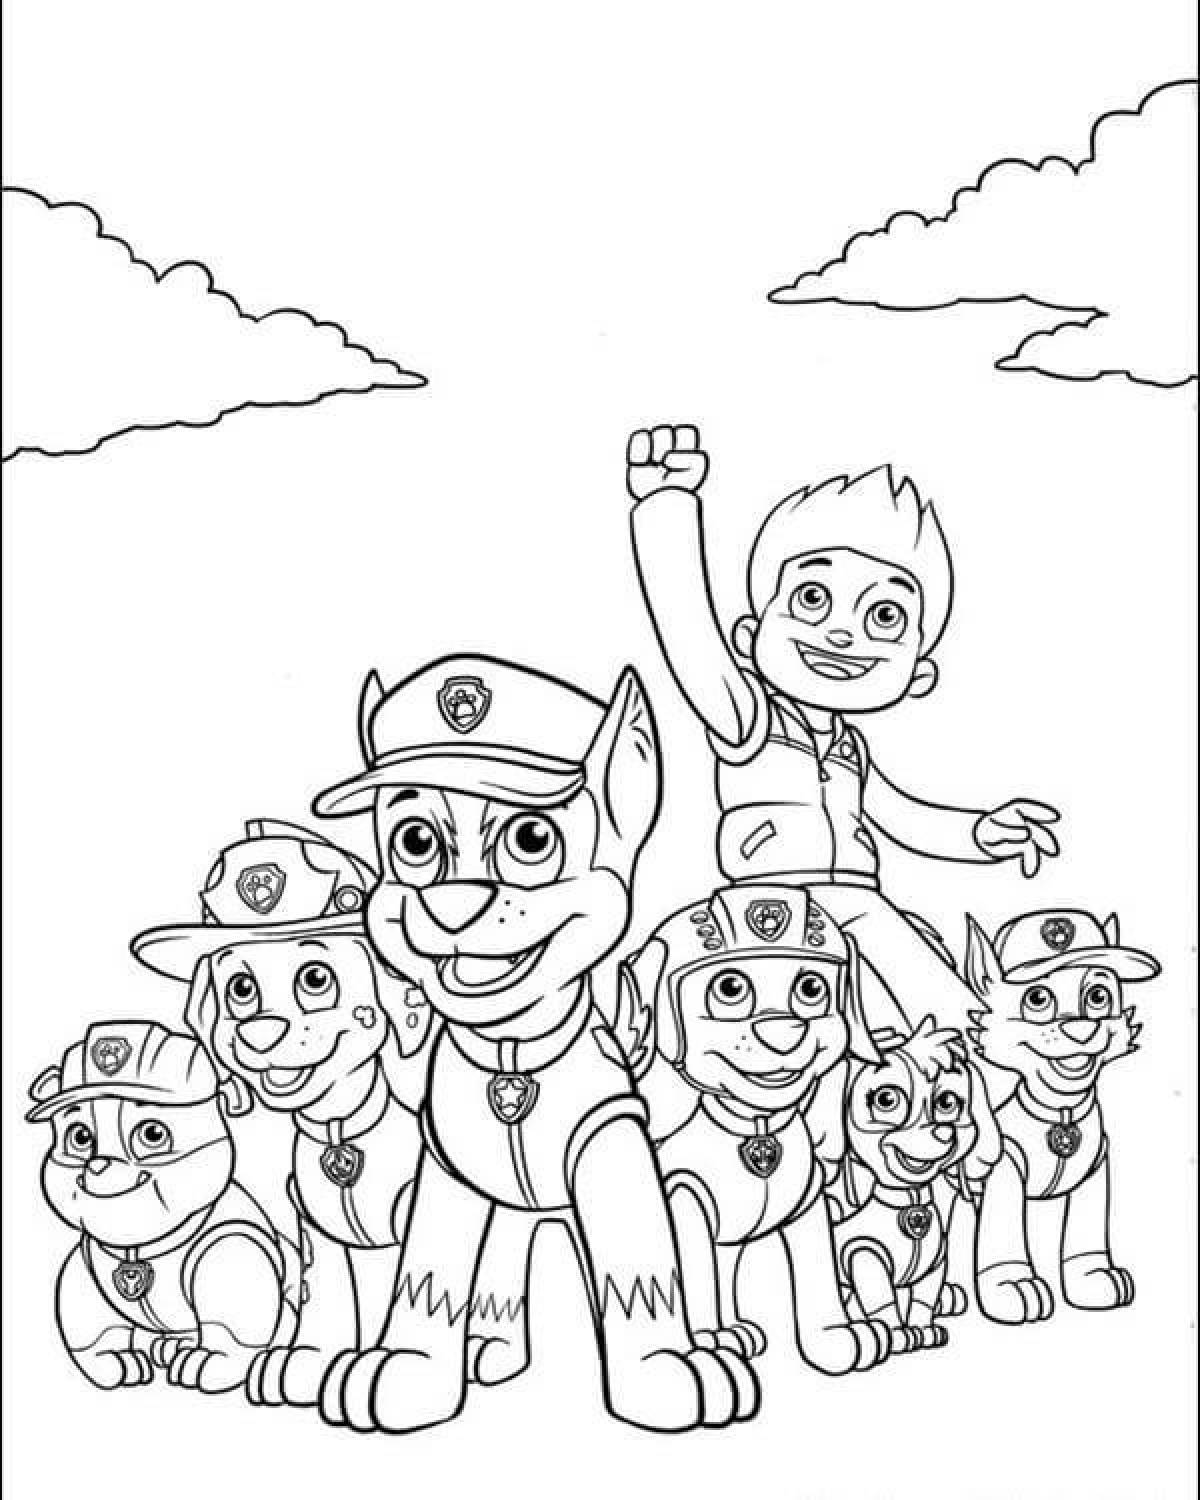 Ryder and the Paw Patrol